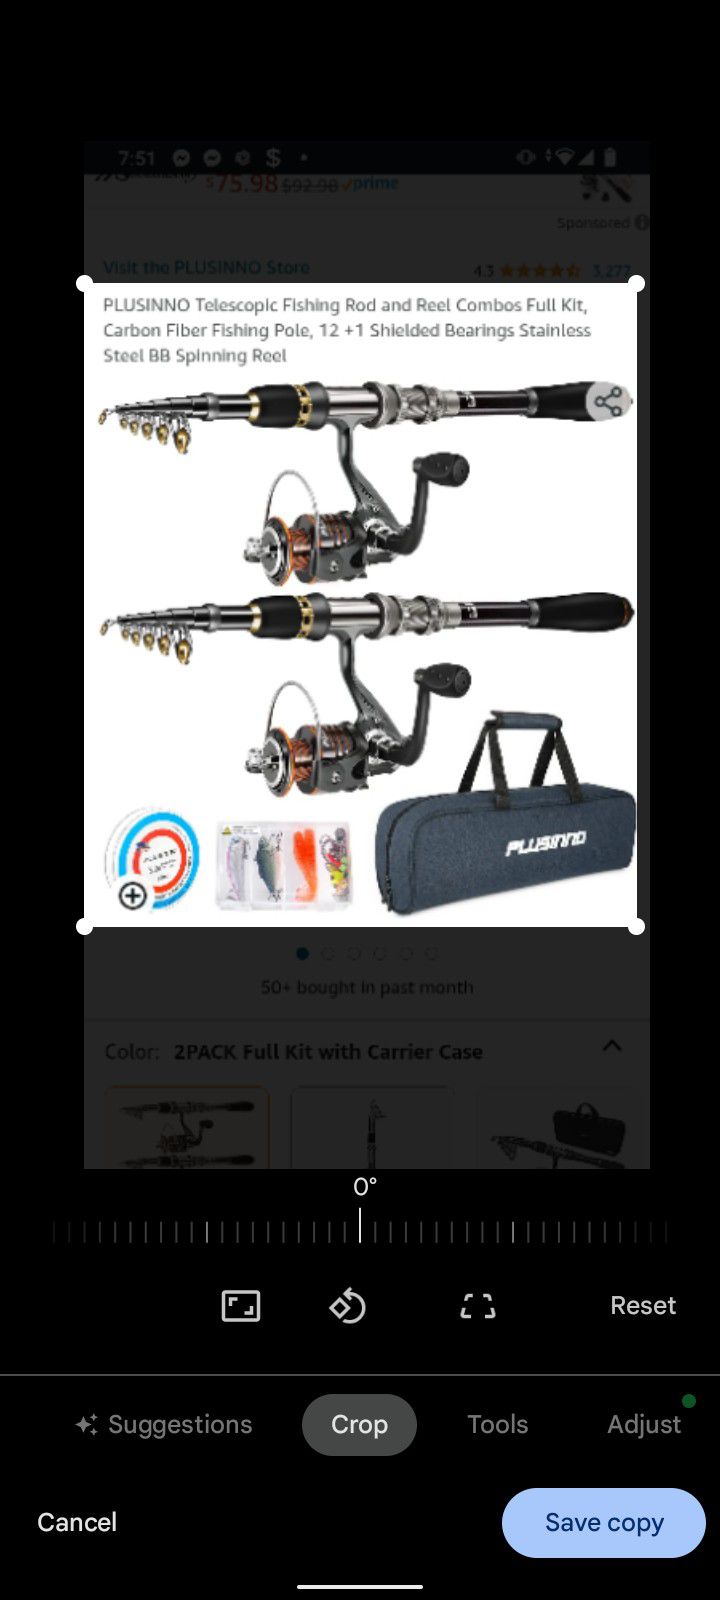 BRAND NEW 2pk Plusinno Fishing Rod With Reel Combo kit for Sale in